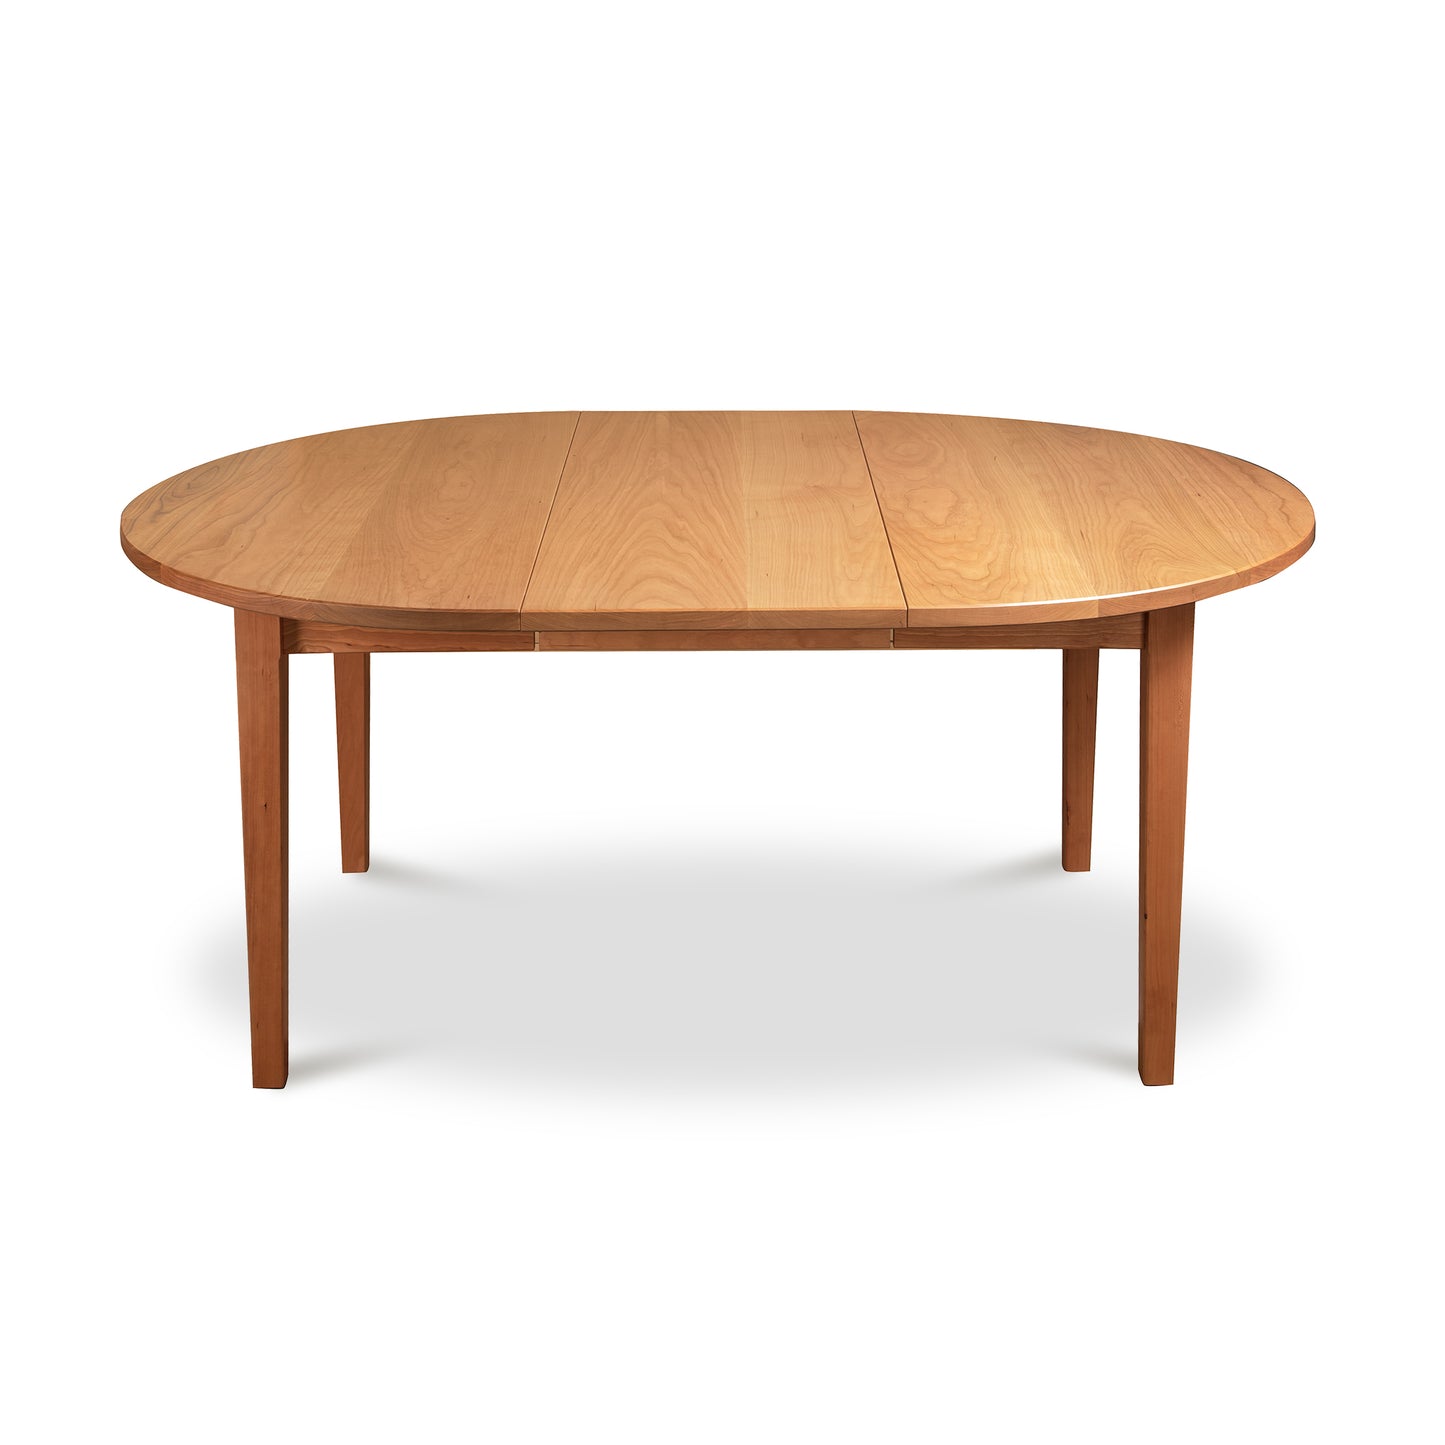 A wooden table with an oval shape.